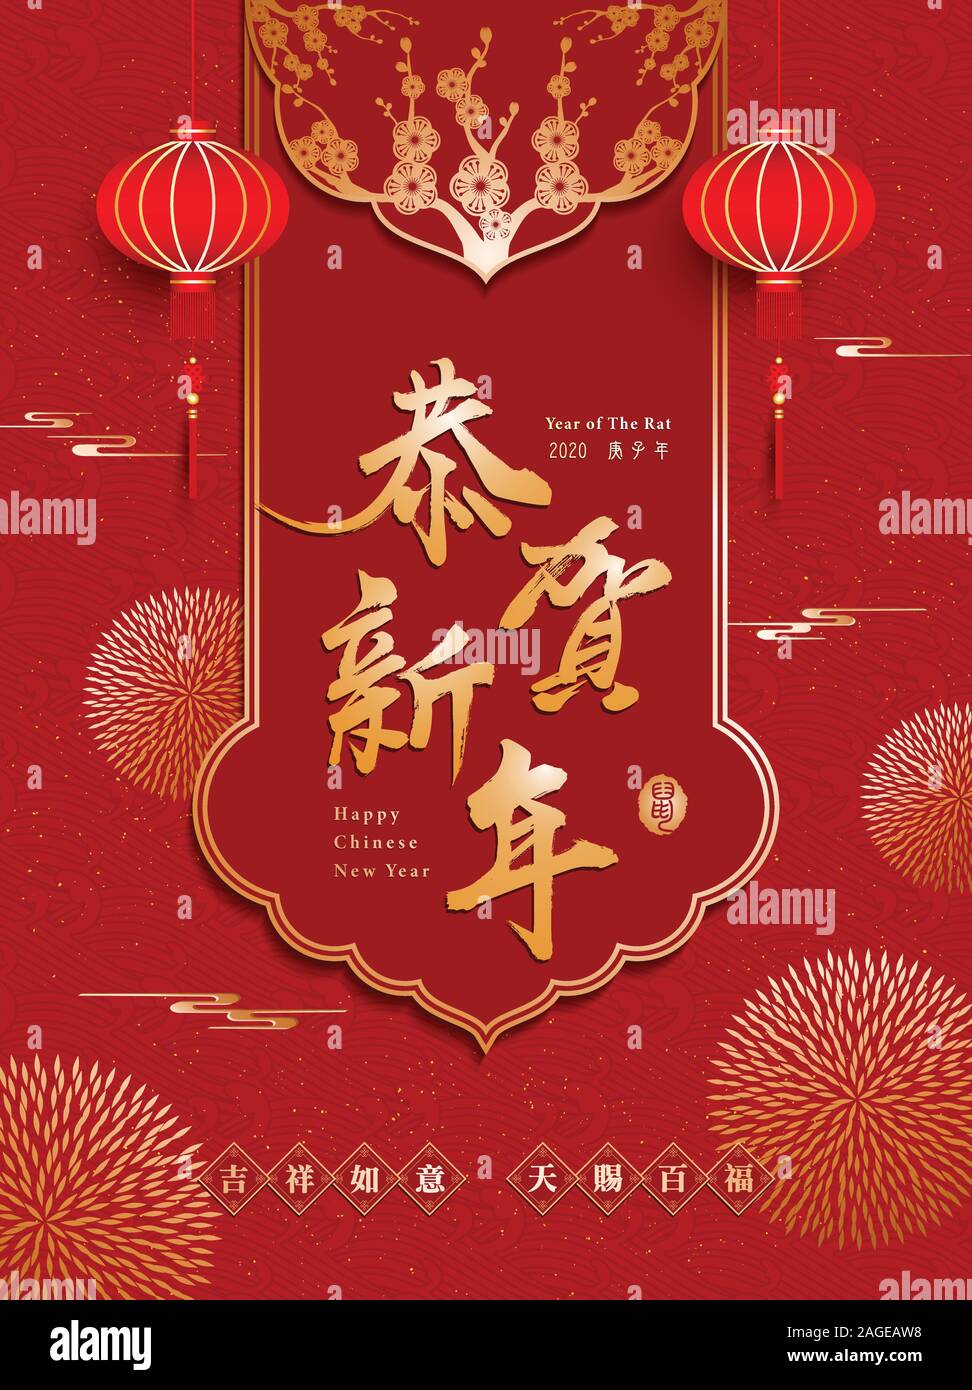 Chinese New Year, The Year of The Rat. Translation: Happy Chinese New Year. lowest part seal translation : Good fortune , auspicious & bliss. Stock Vector